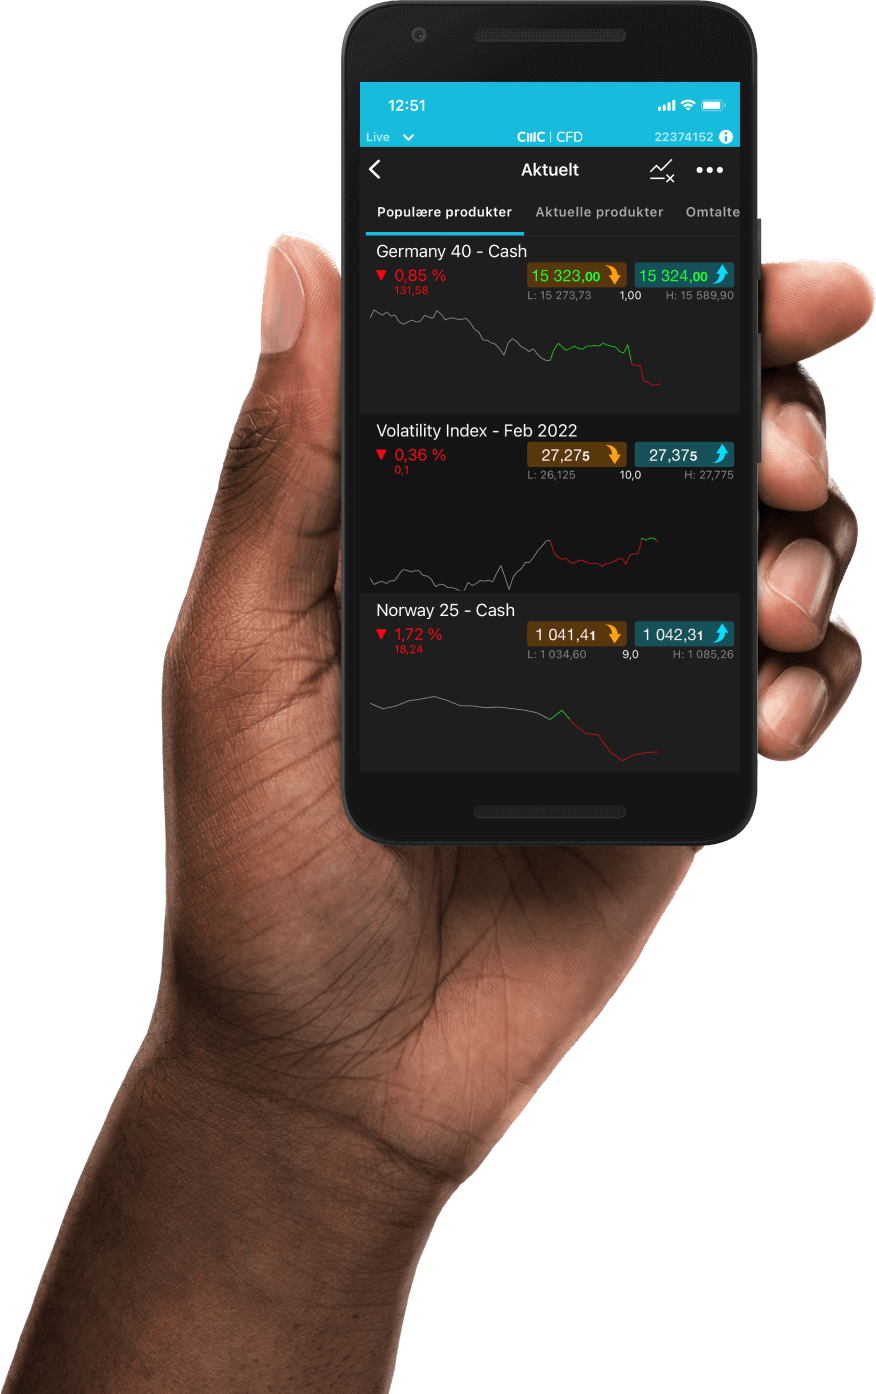 Mobile trading platform on iOS and Android